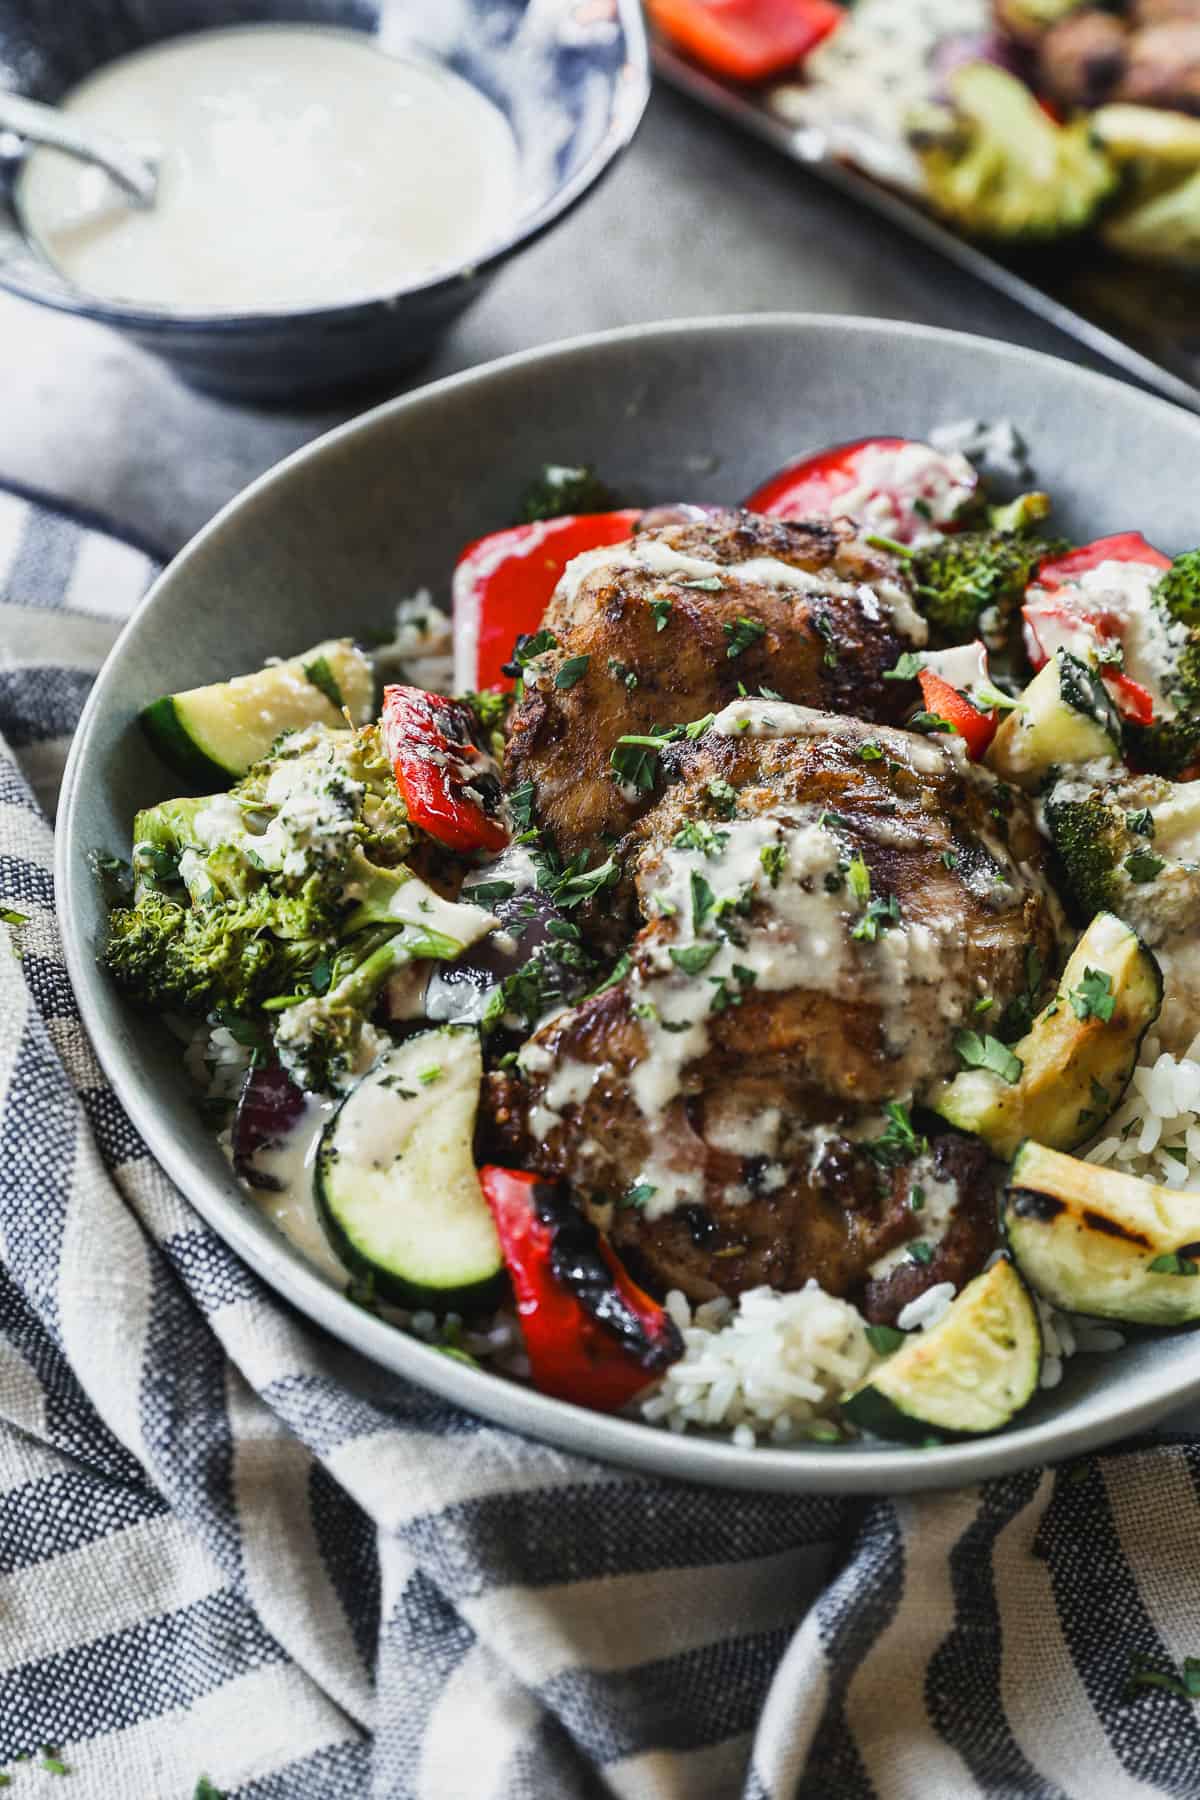 A fresh Tahini Chicken Bowl with grilled chicken thighs and vegetables, drizzled with a homemade sauce.